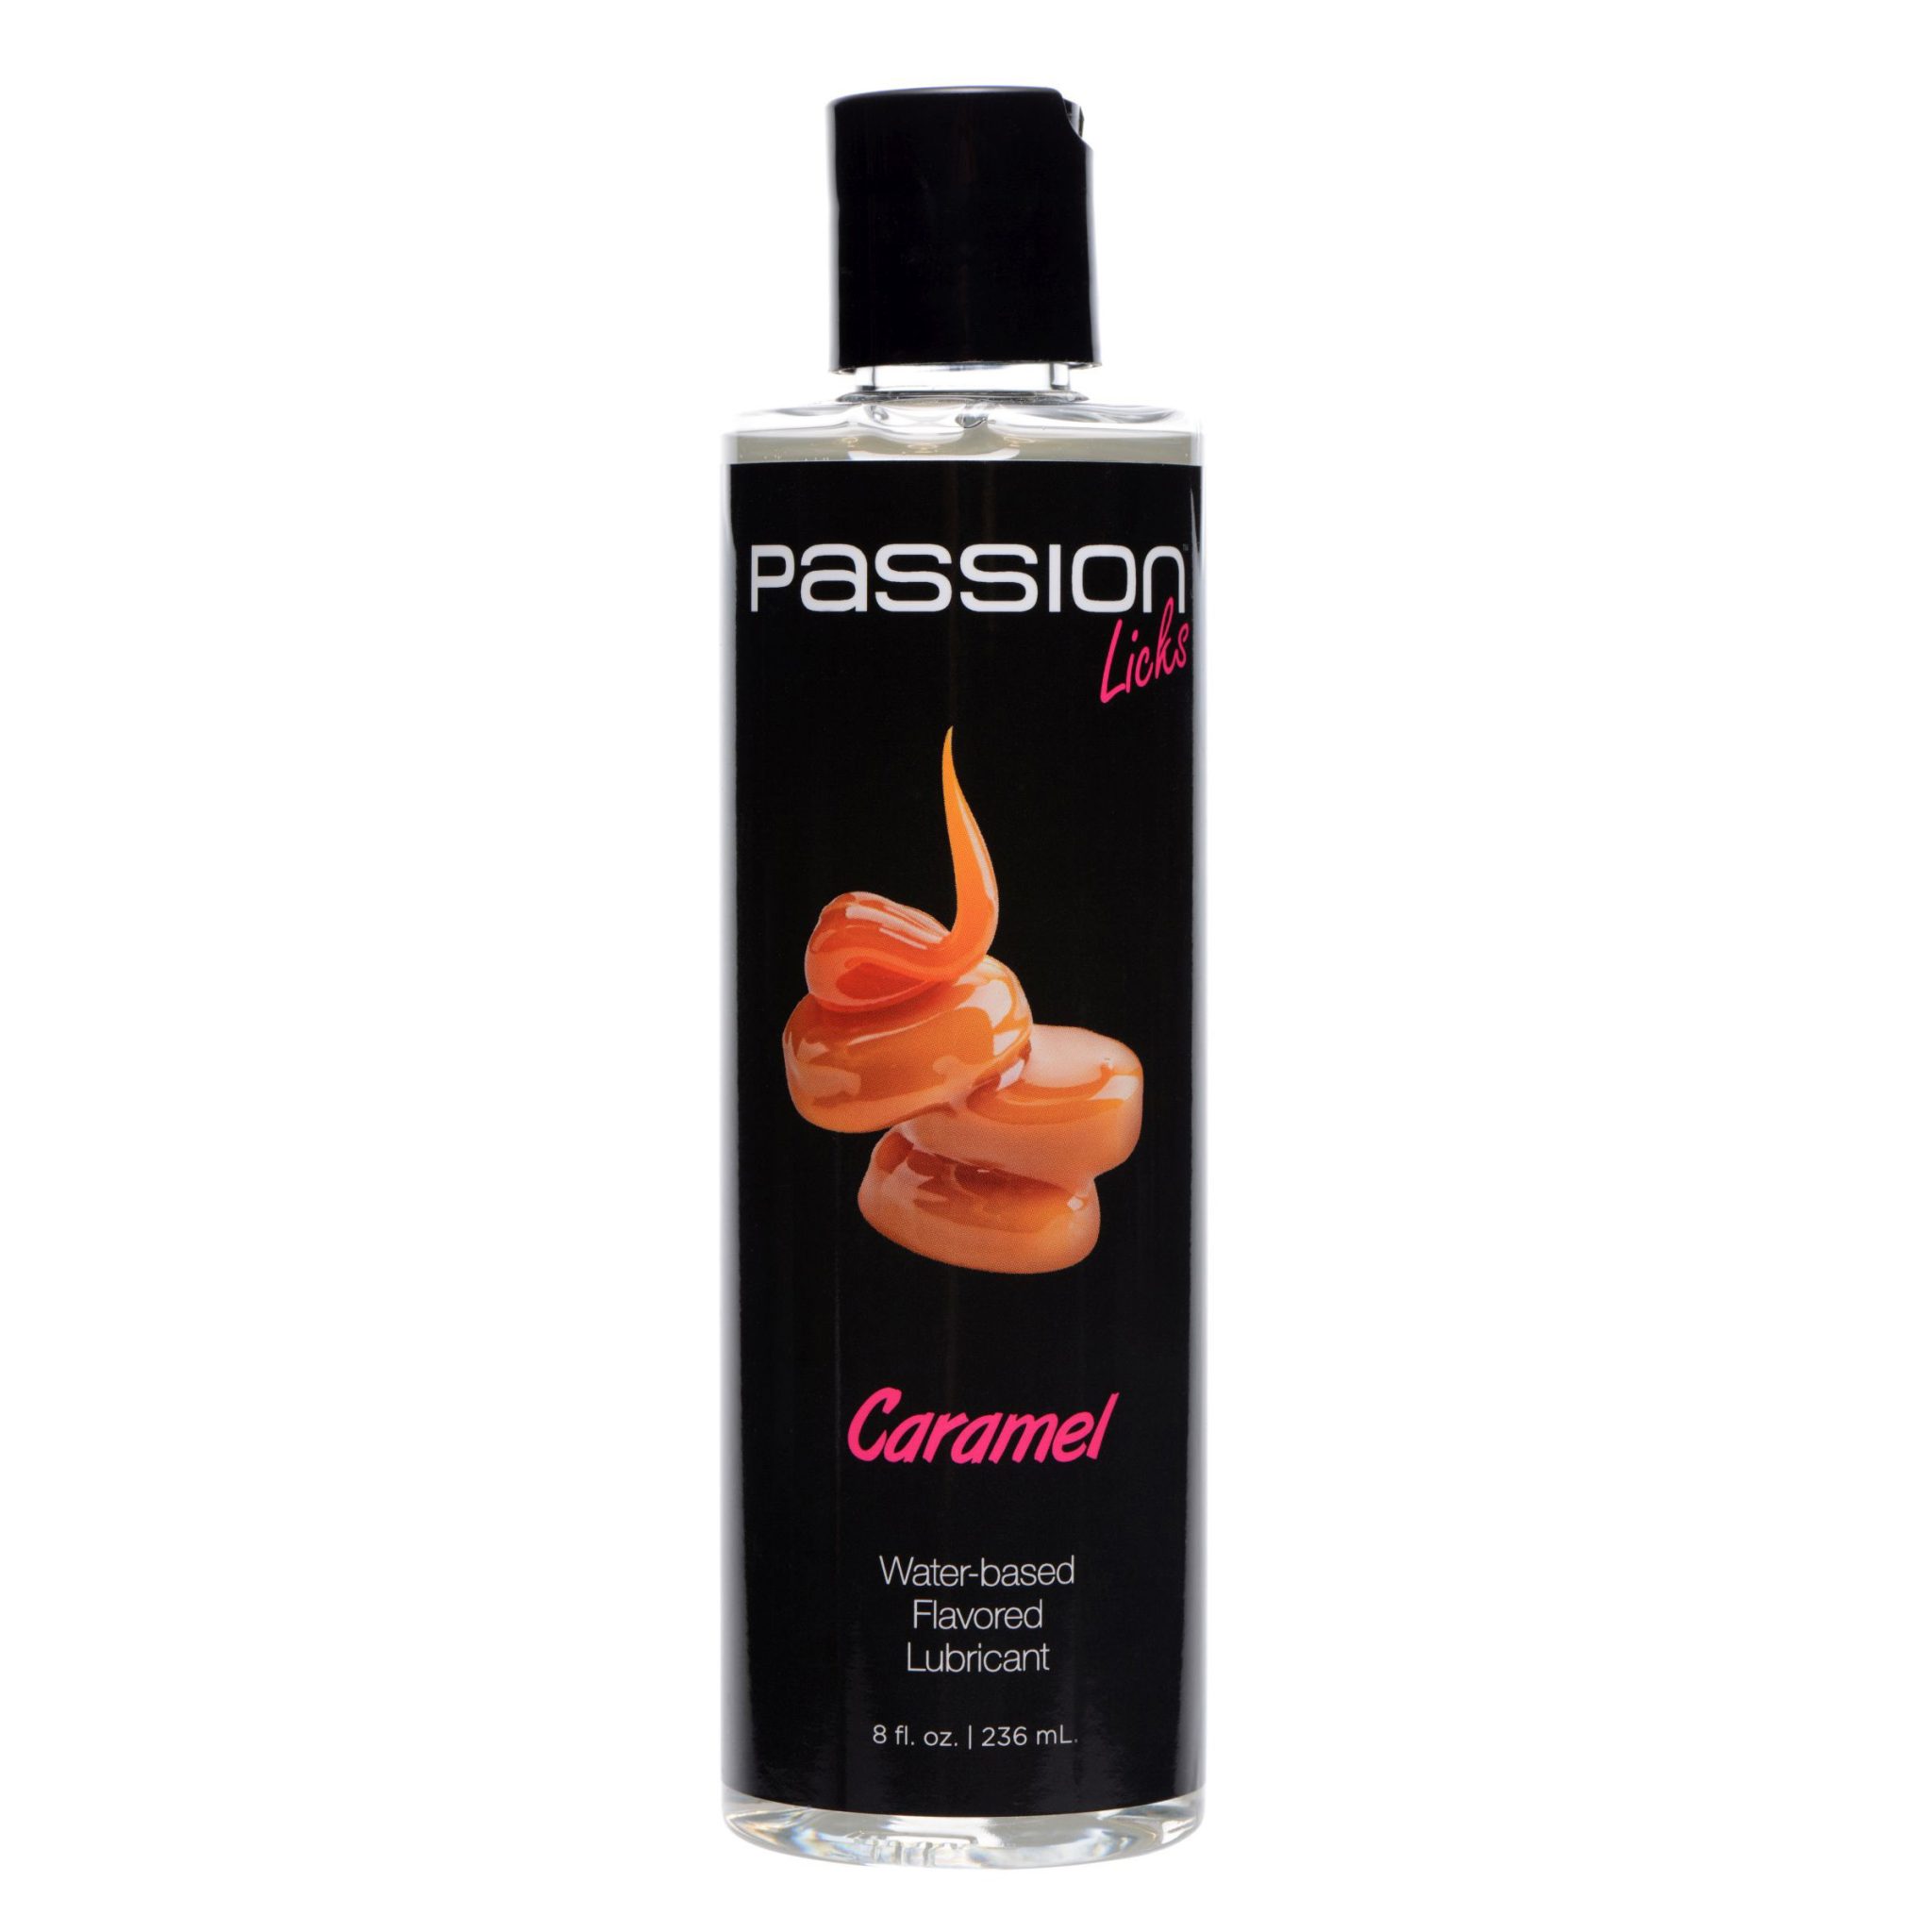 Passion Licks Caramel Water Based Flavored Lubricant – 8 oz